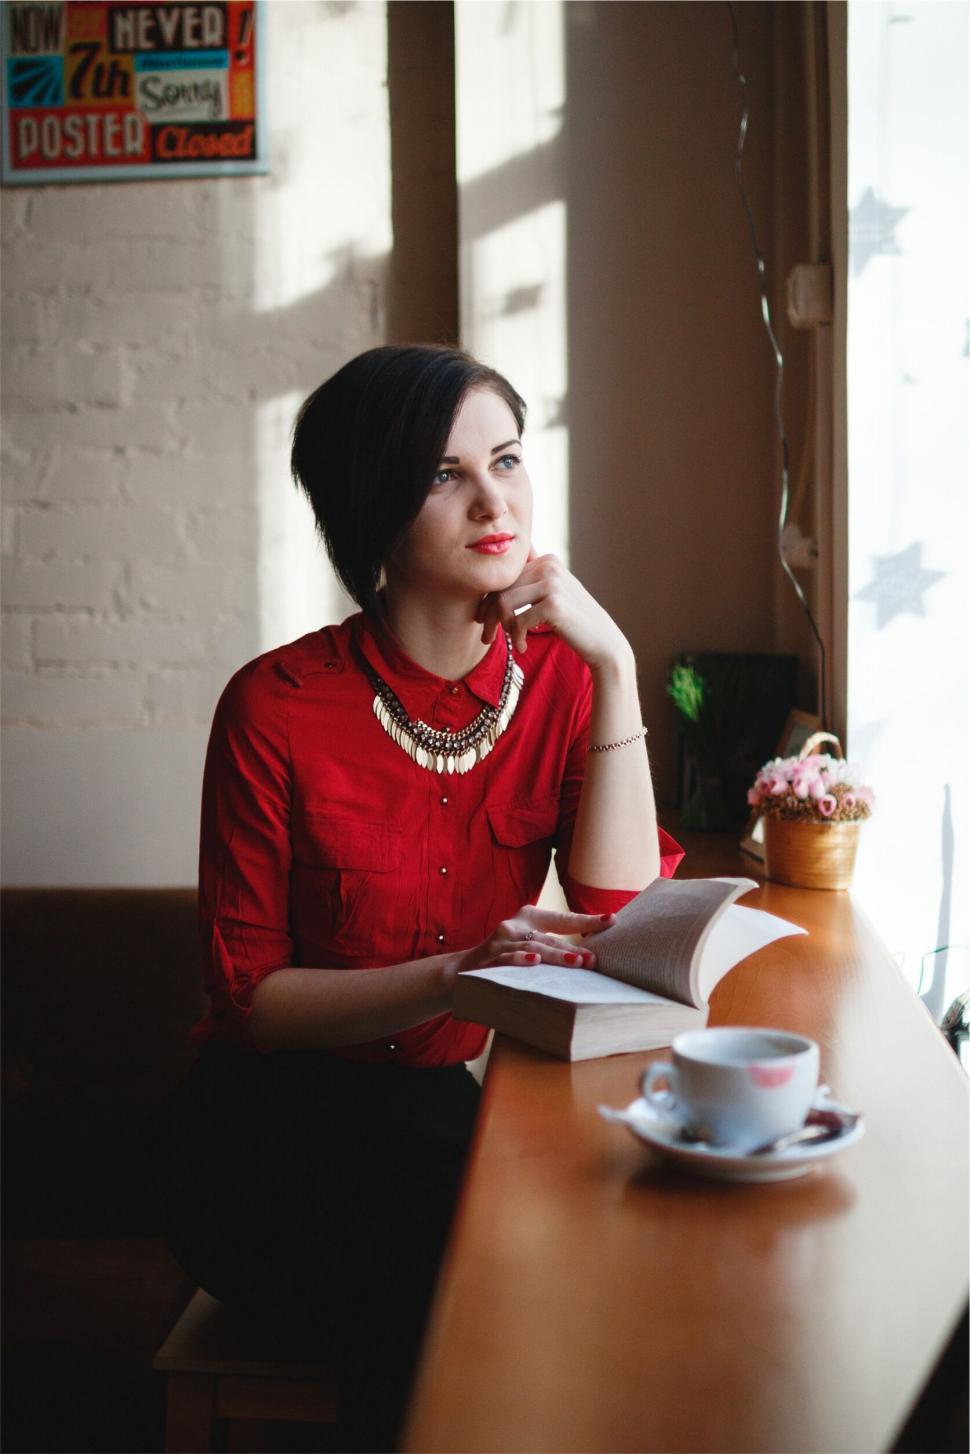 Free Image of A woman sitting at a table with a book and a cup of coffee 